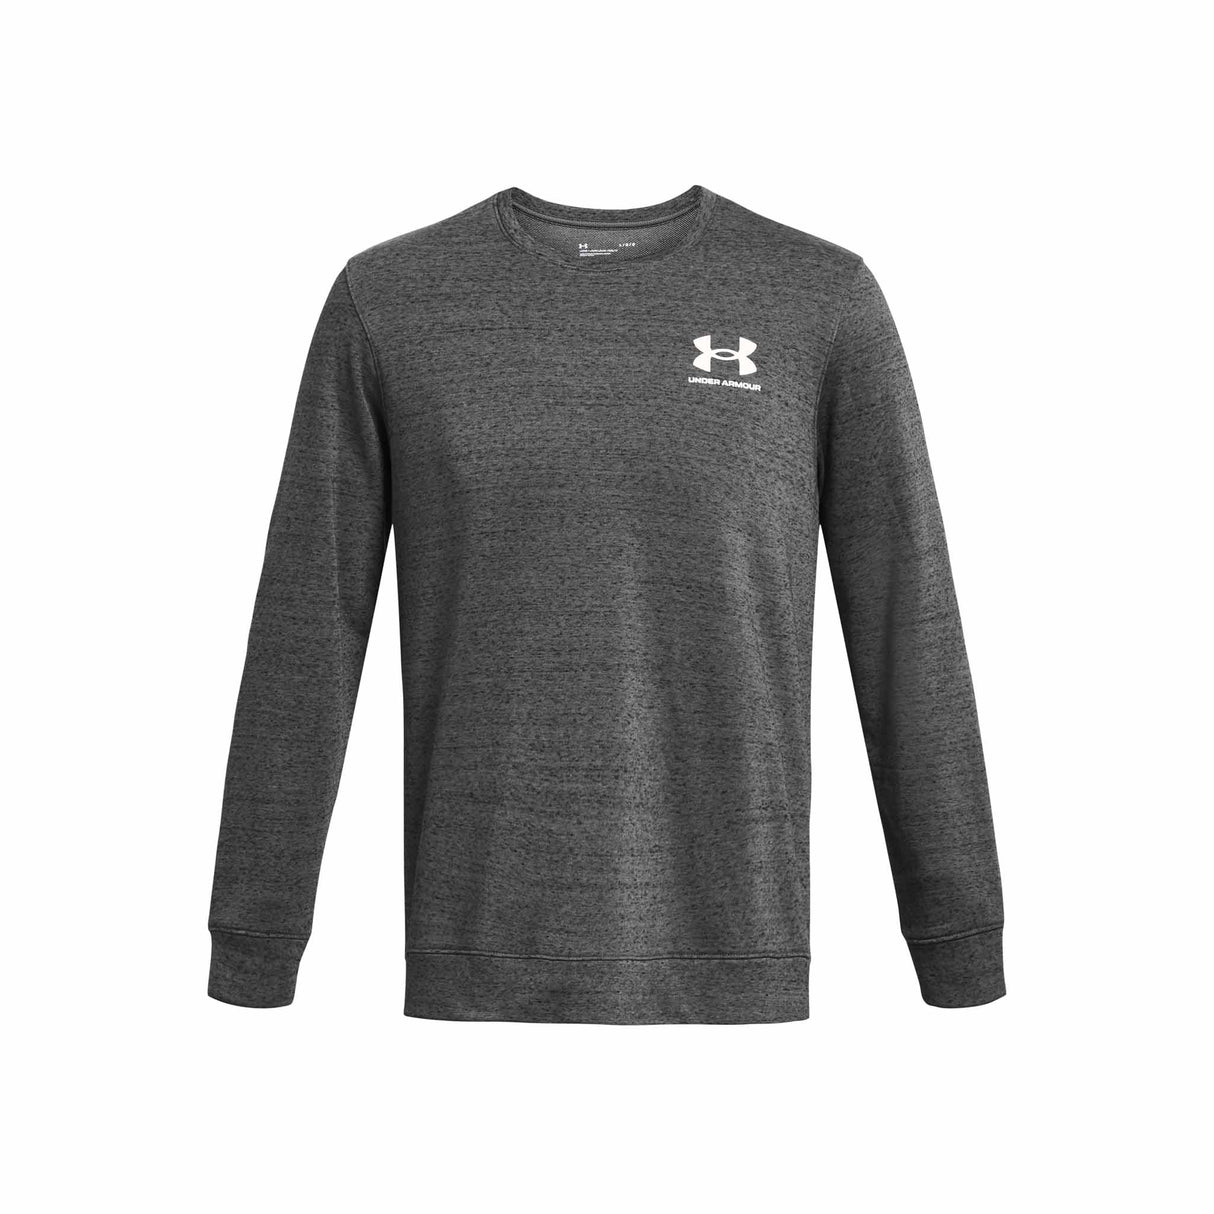 Under Armour Rival chandail manches longues homme - Castlerock Light Heather / Onyx White